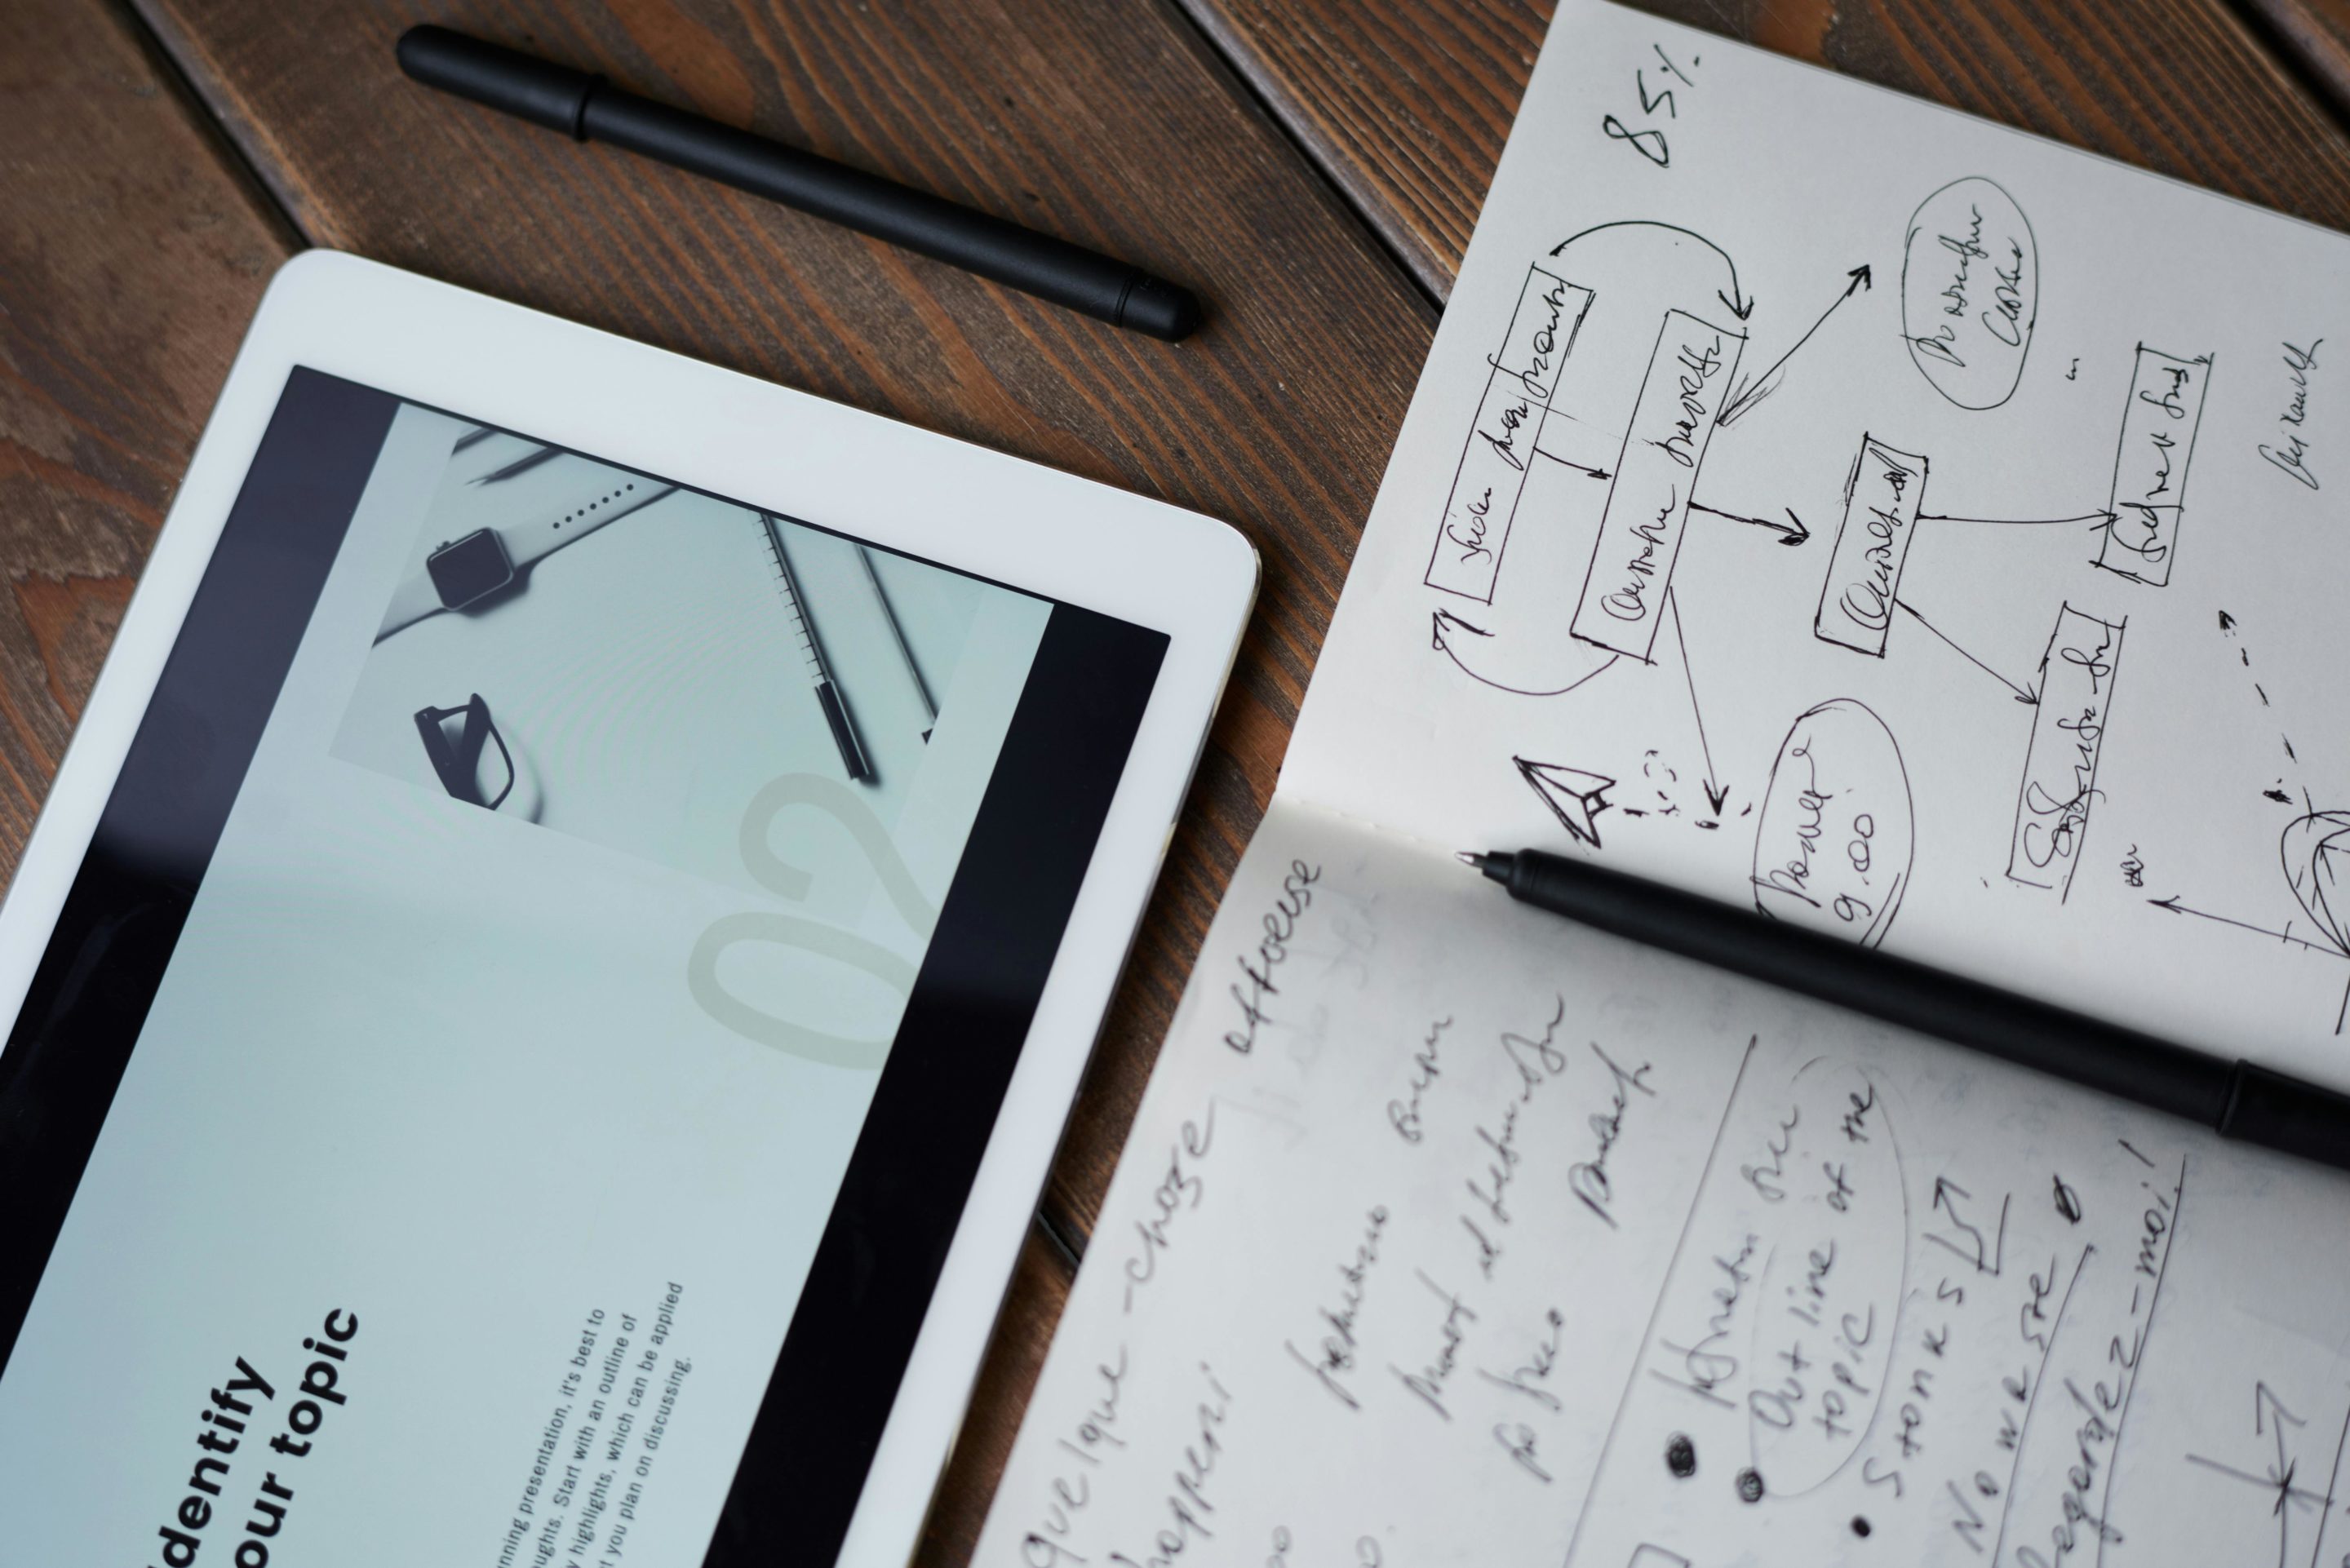 Tablet displaying a presentation slide next to a notebook filled with handwritten notes and diagrams, resting on a wooden table.